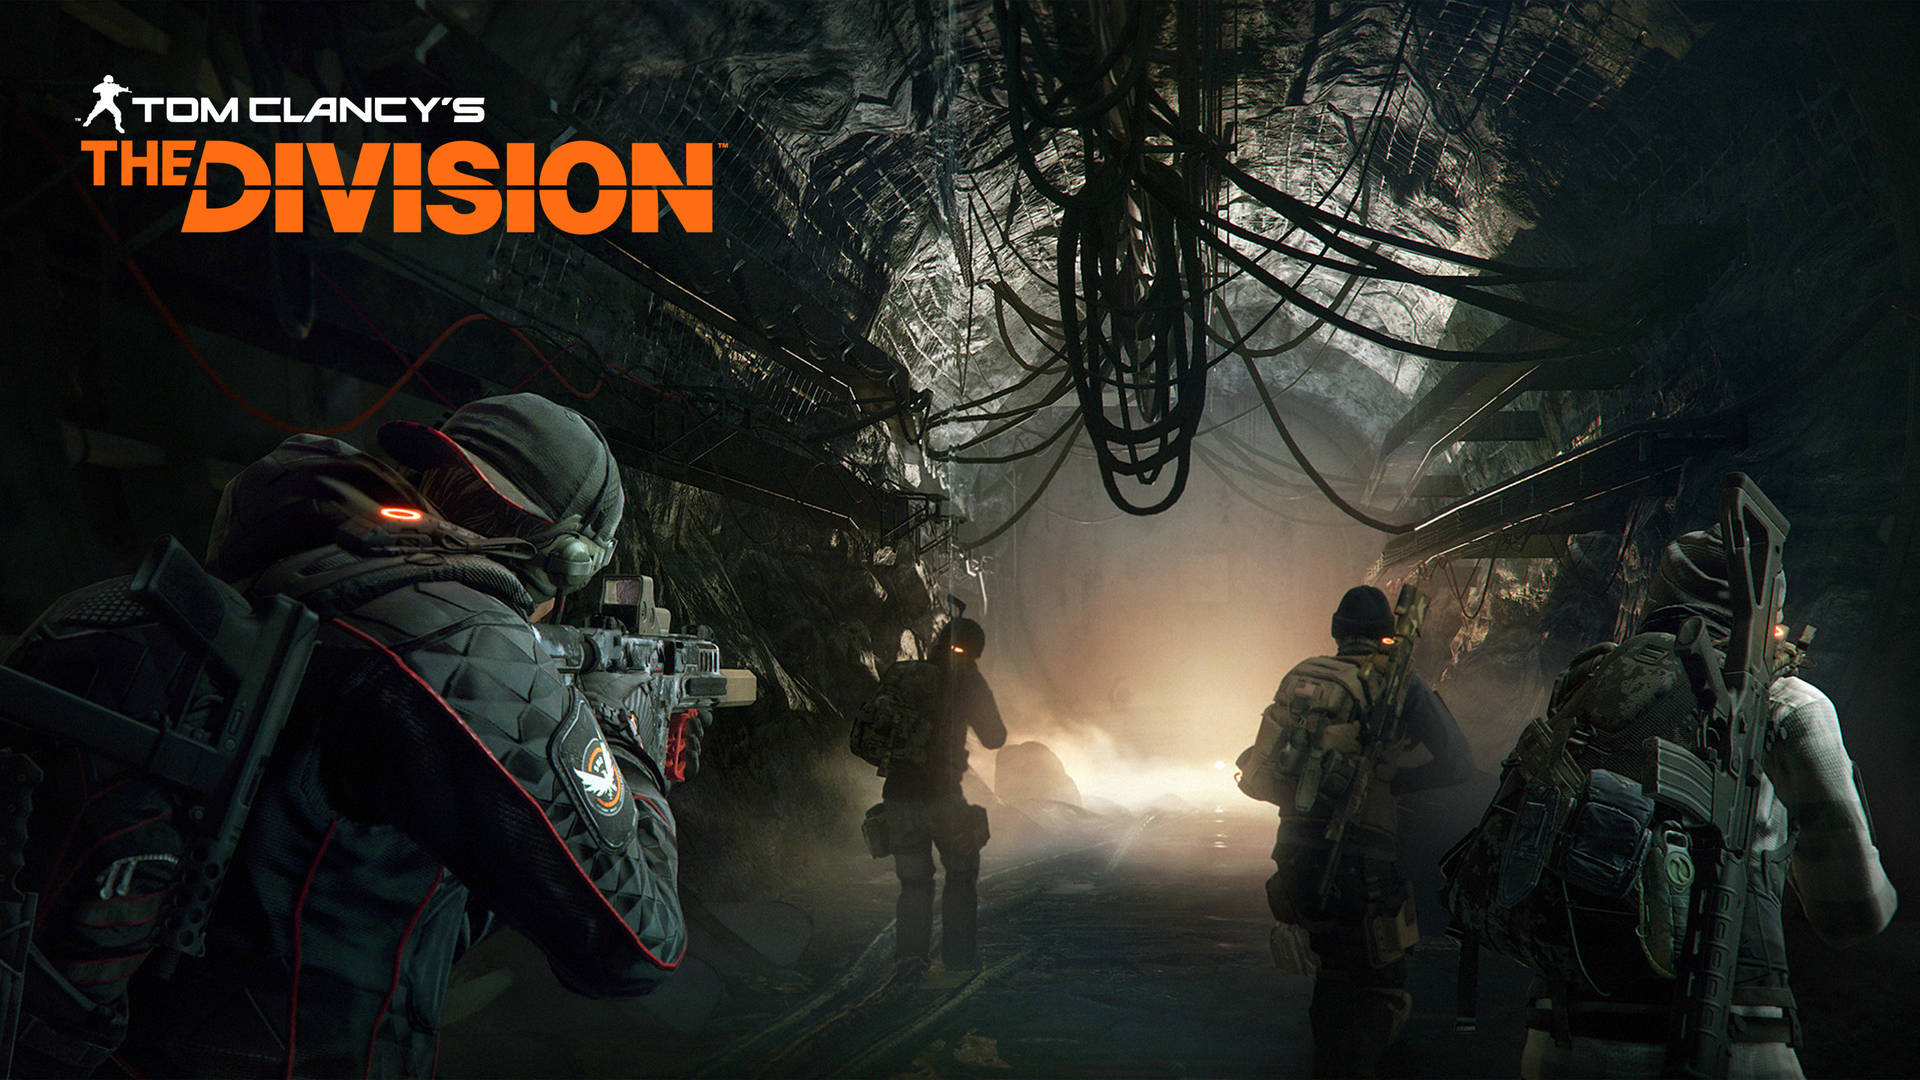 The Division 4k Soldiers In Dark Forest Background